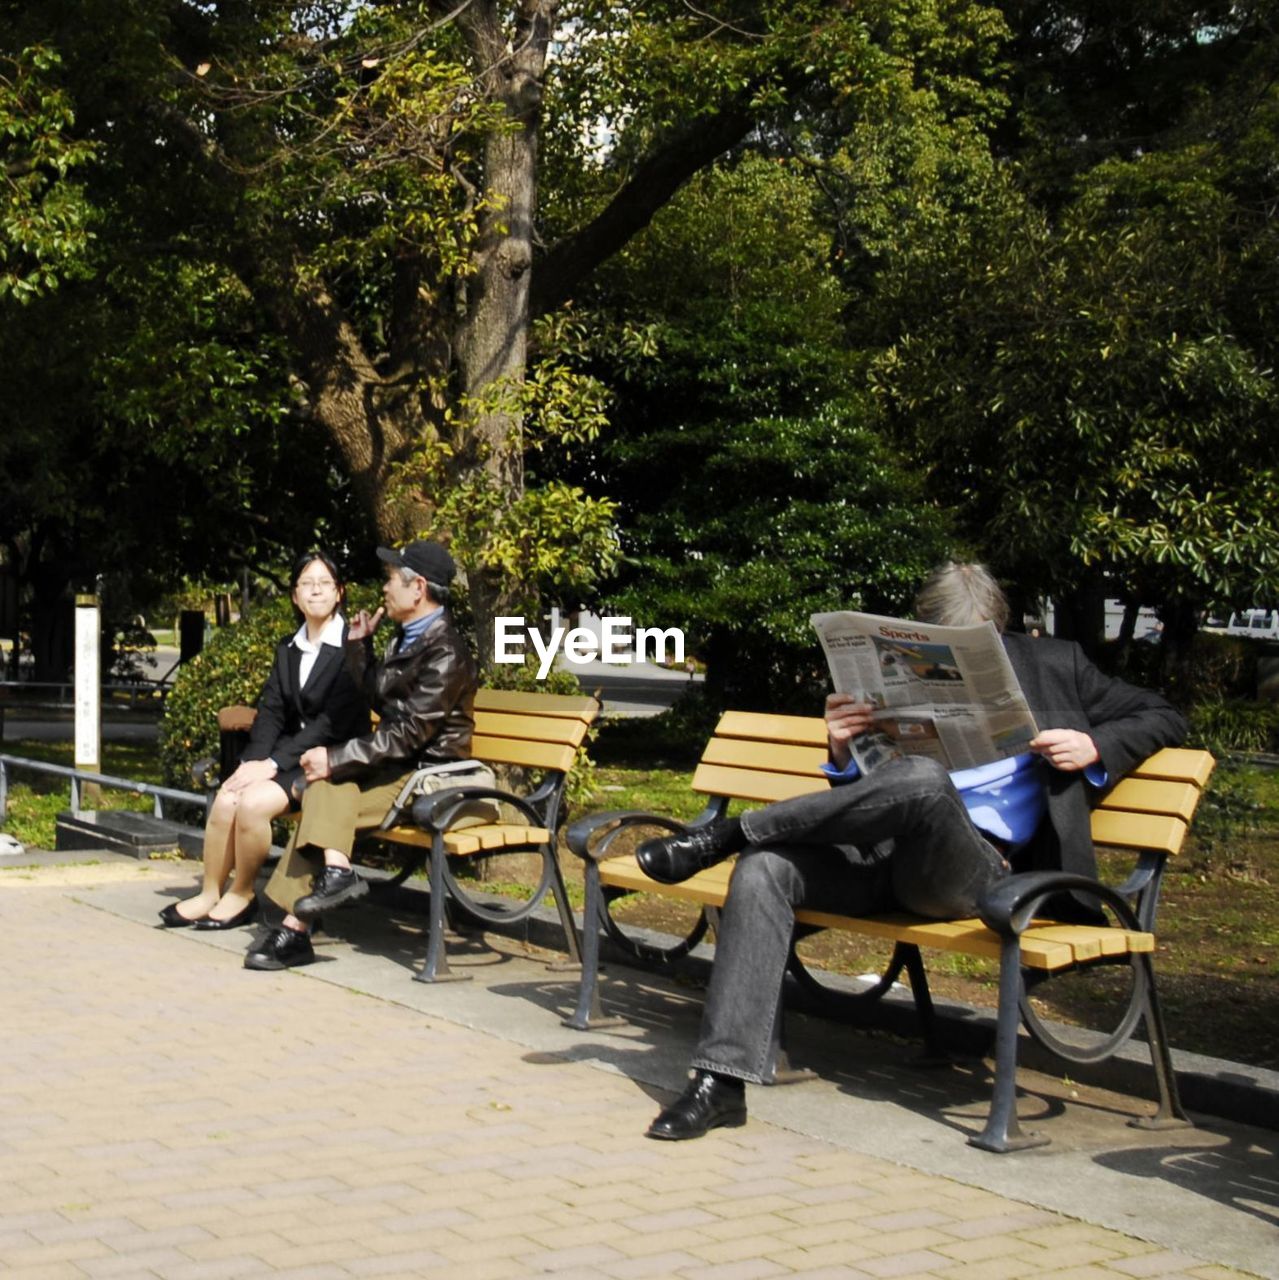 People sitting on benches against trees in park